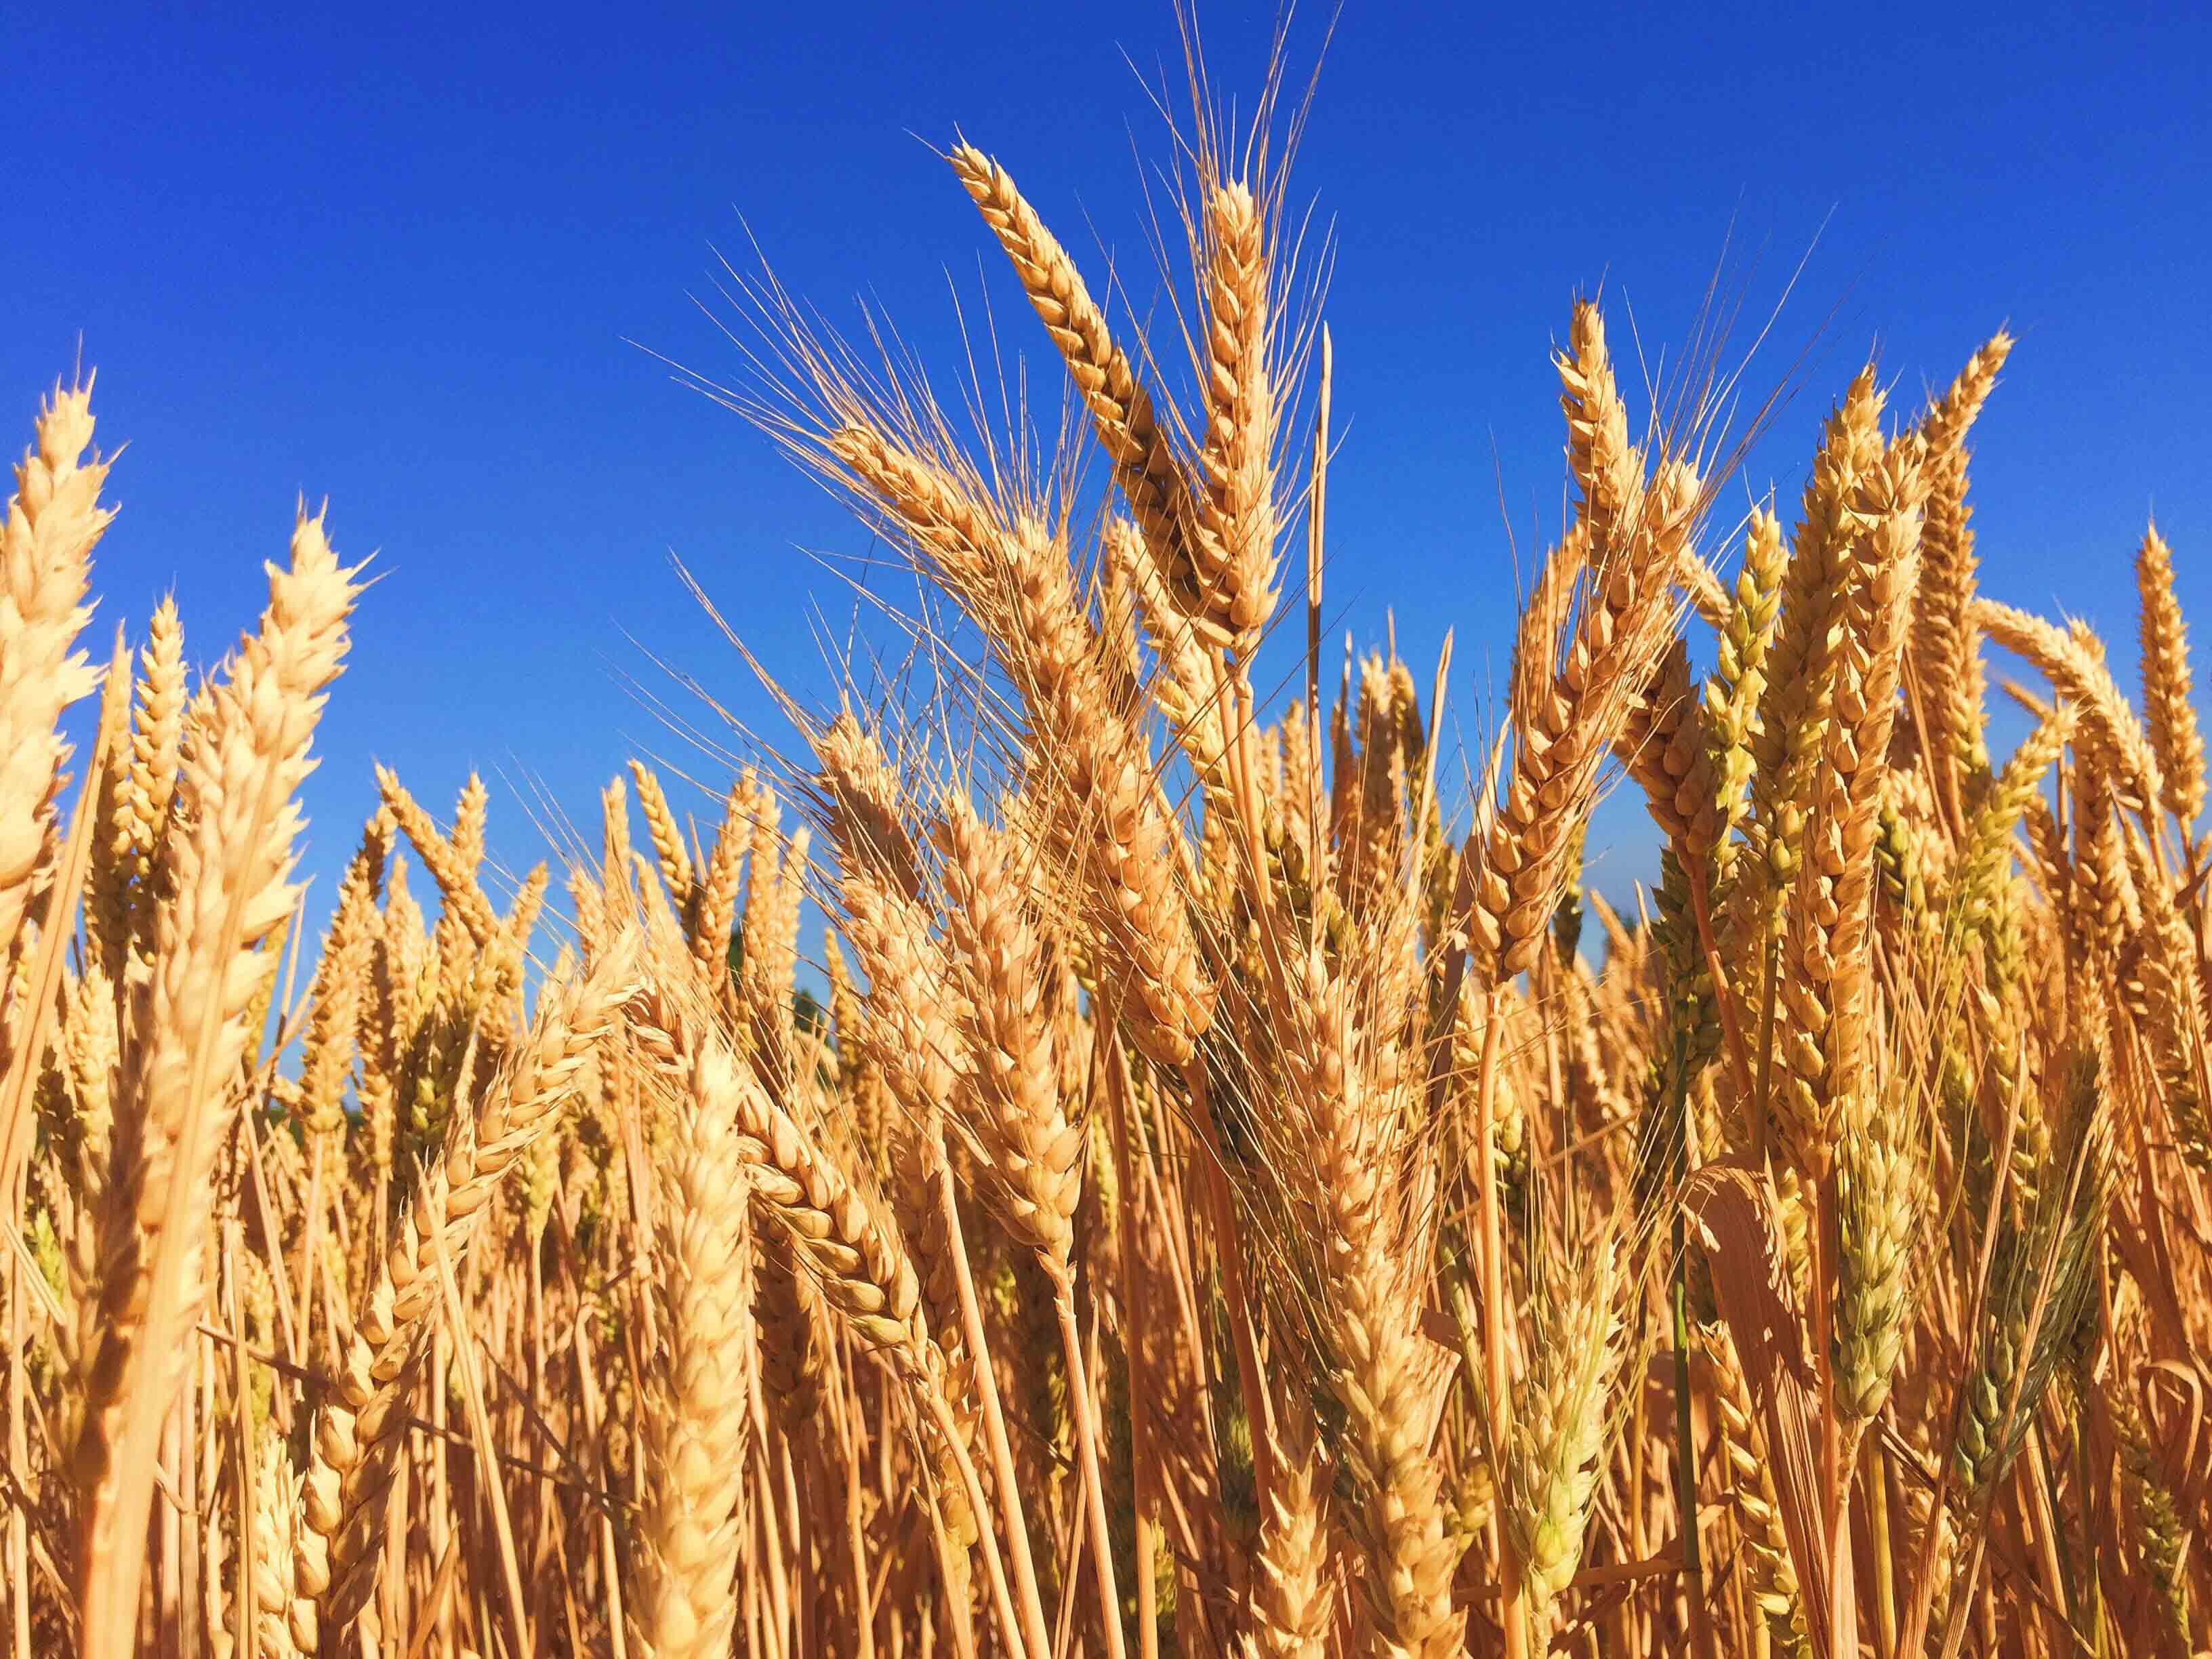 Wheat Production: An Overview